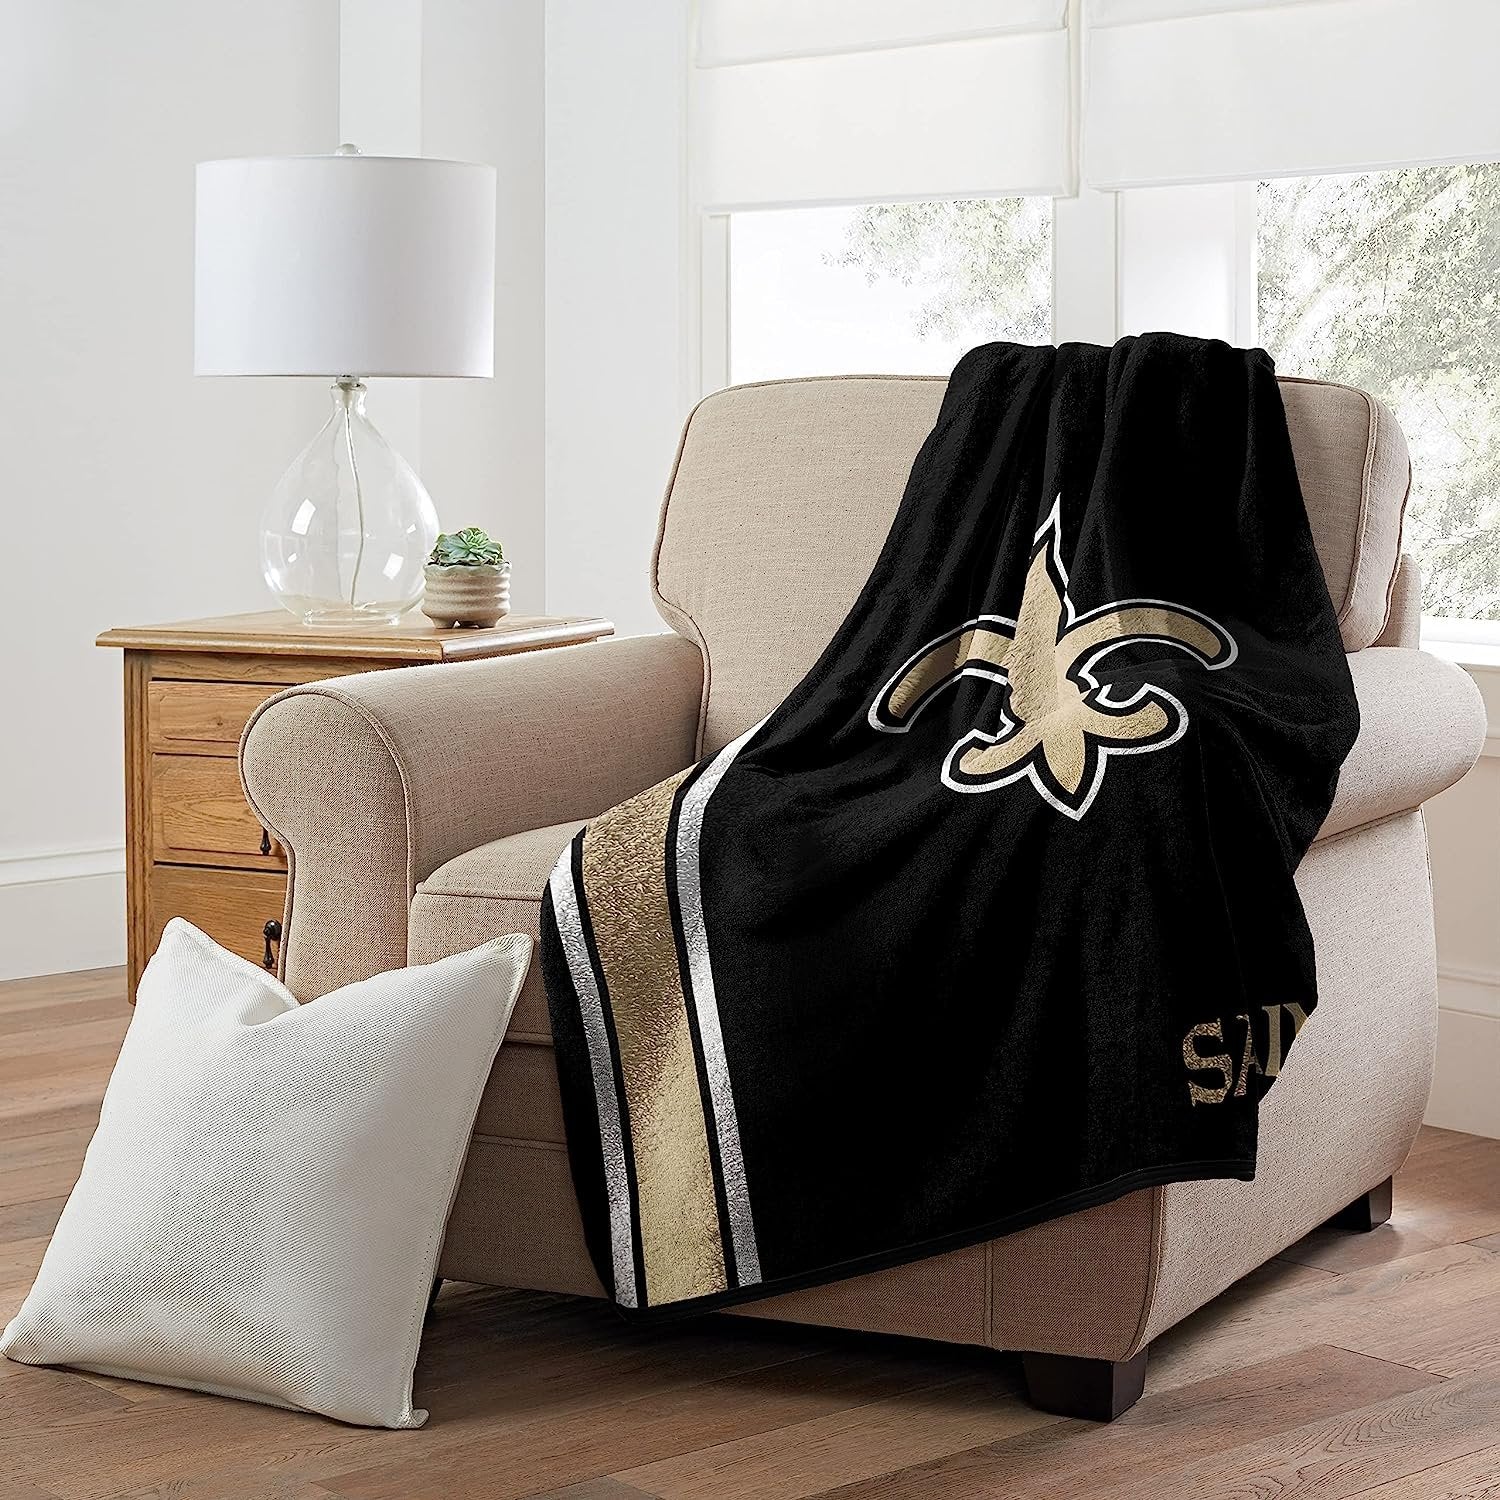 New Orleans Saints Throw Blanket, Polyester Super Soft Sherpa, 50X60 Inch, Jersey Design